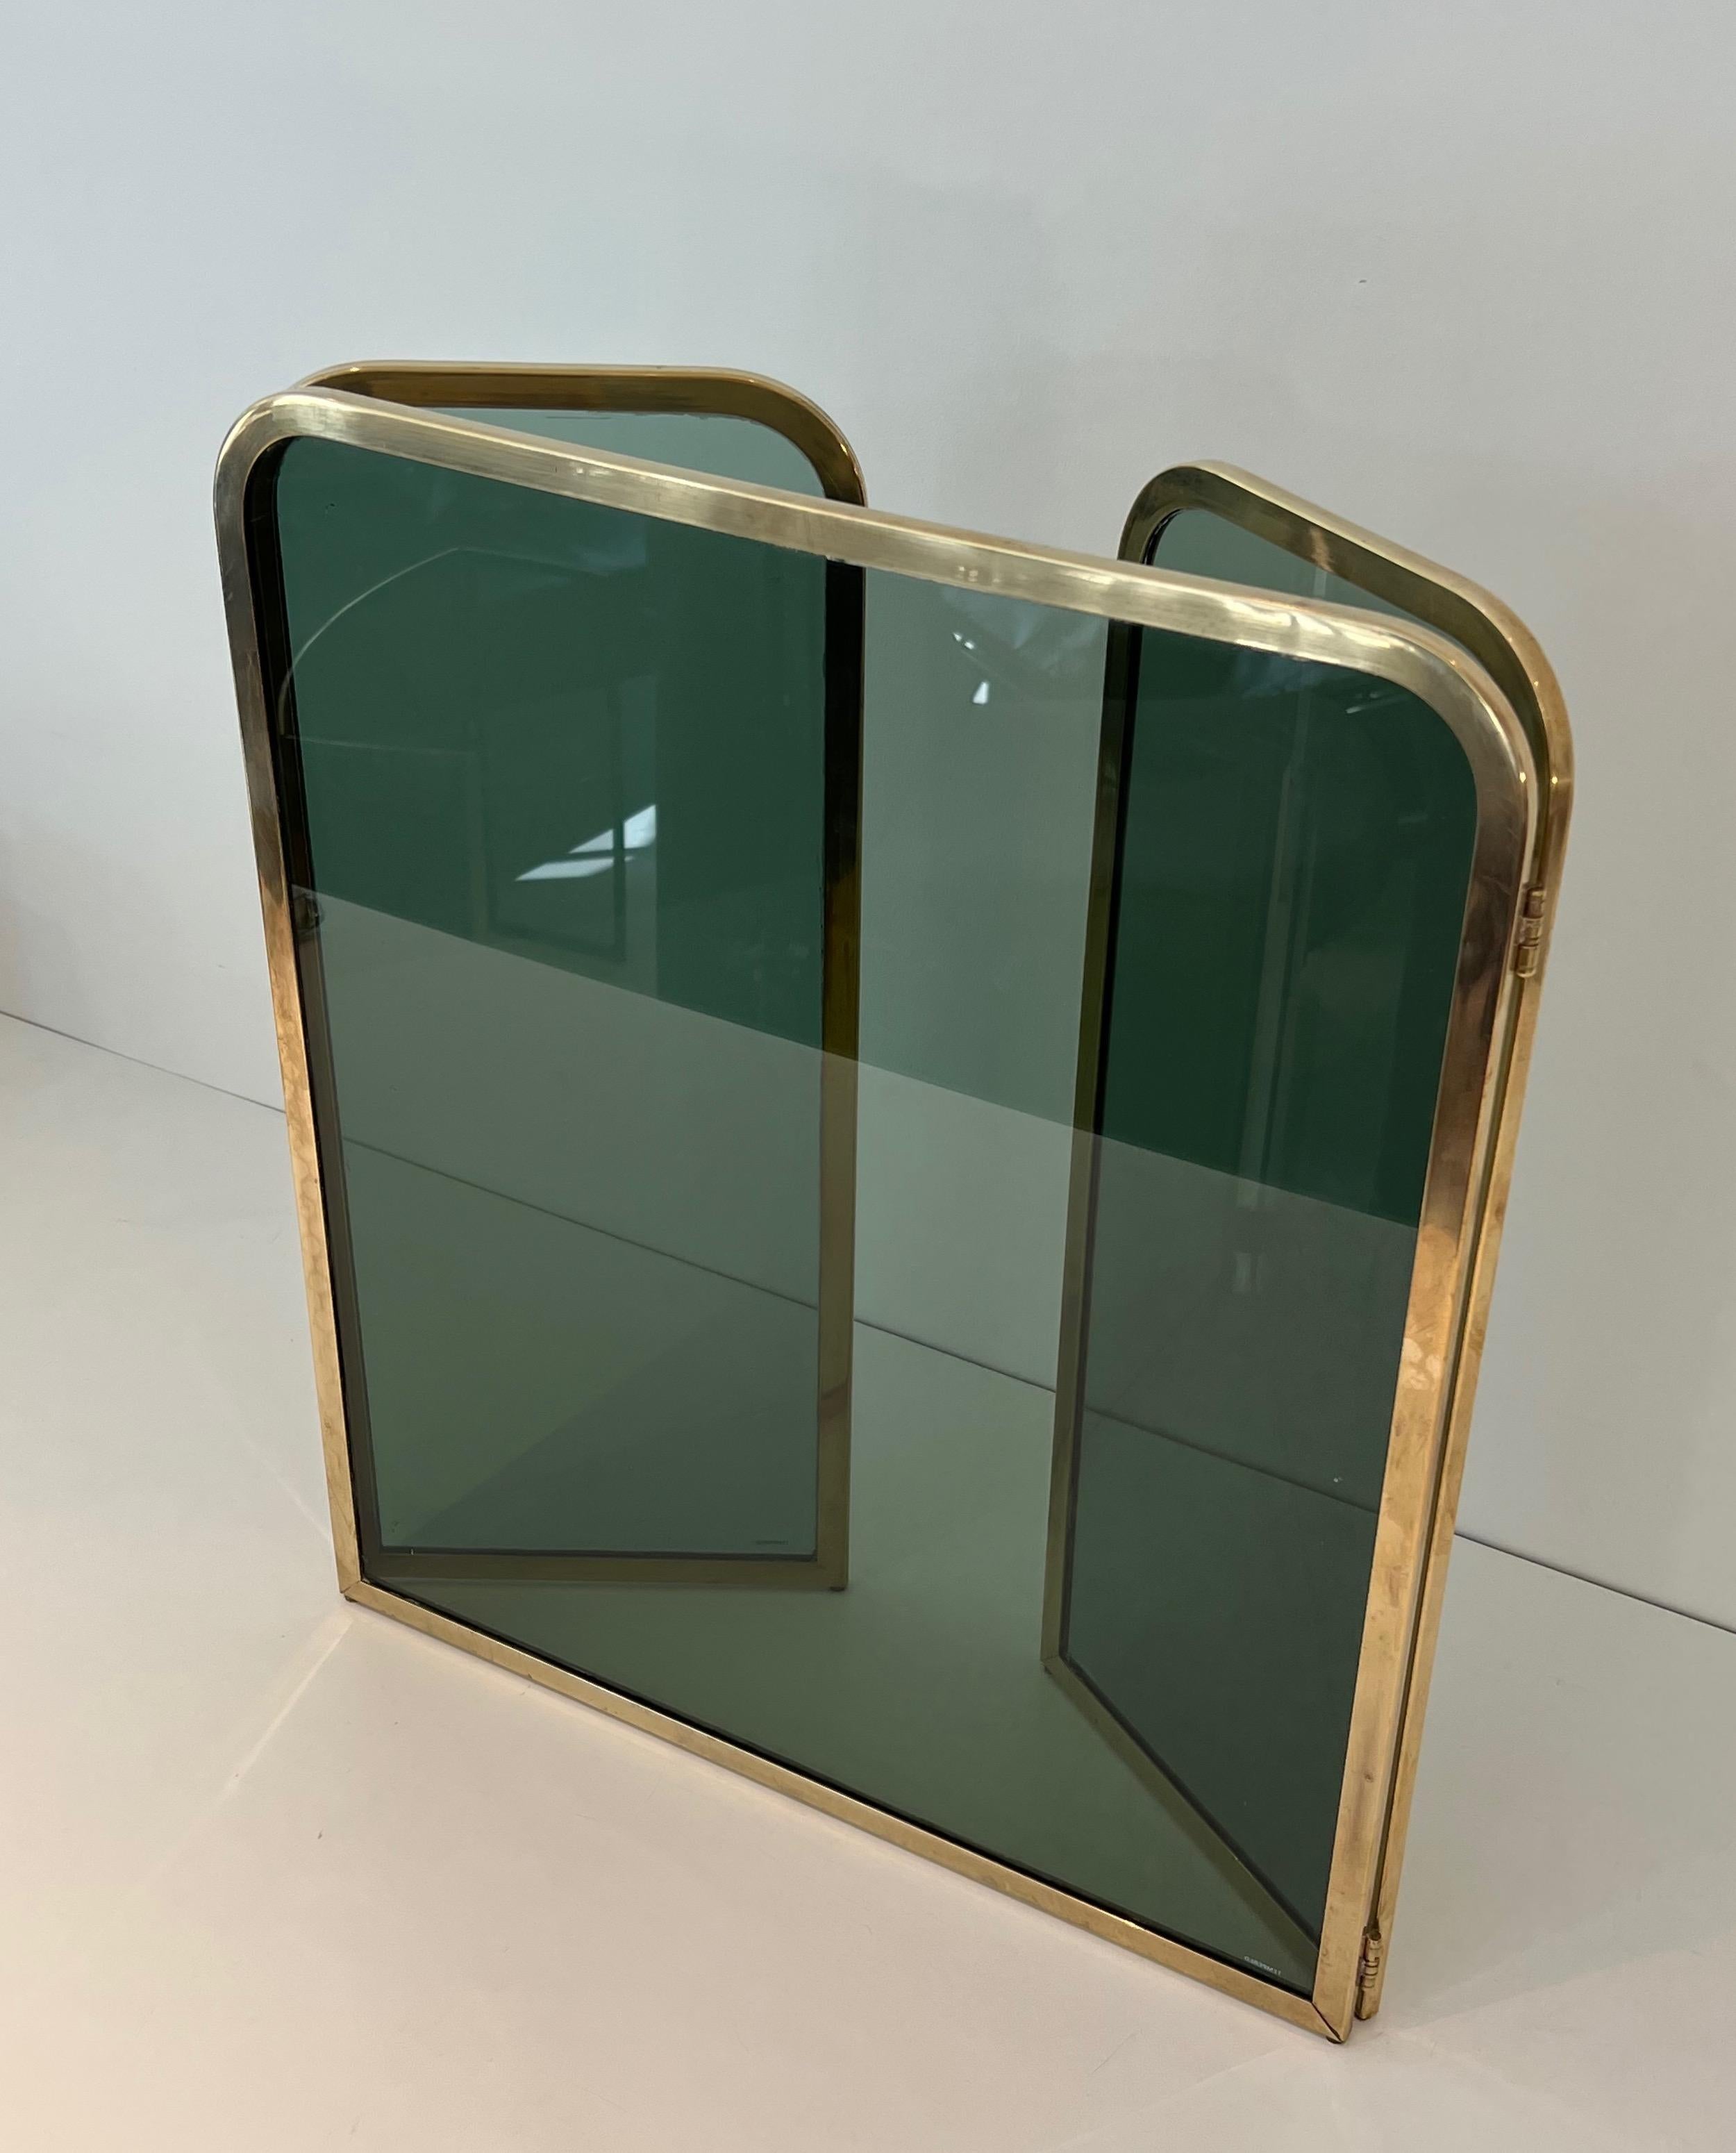 Fireplace Screen Made of 3 Greenish Glass Panels Surrounded by a Brass Frame For Sale 10